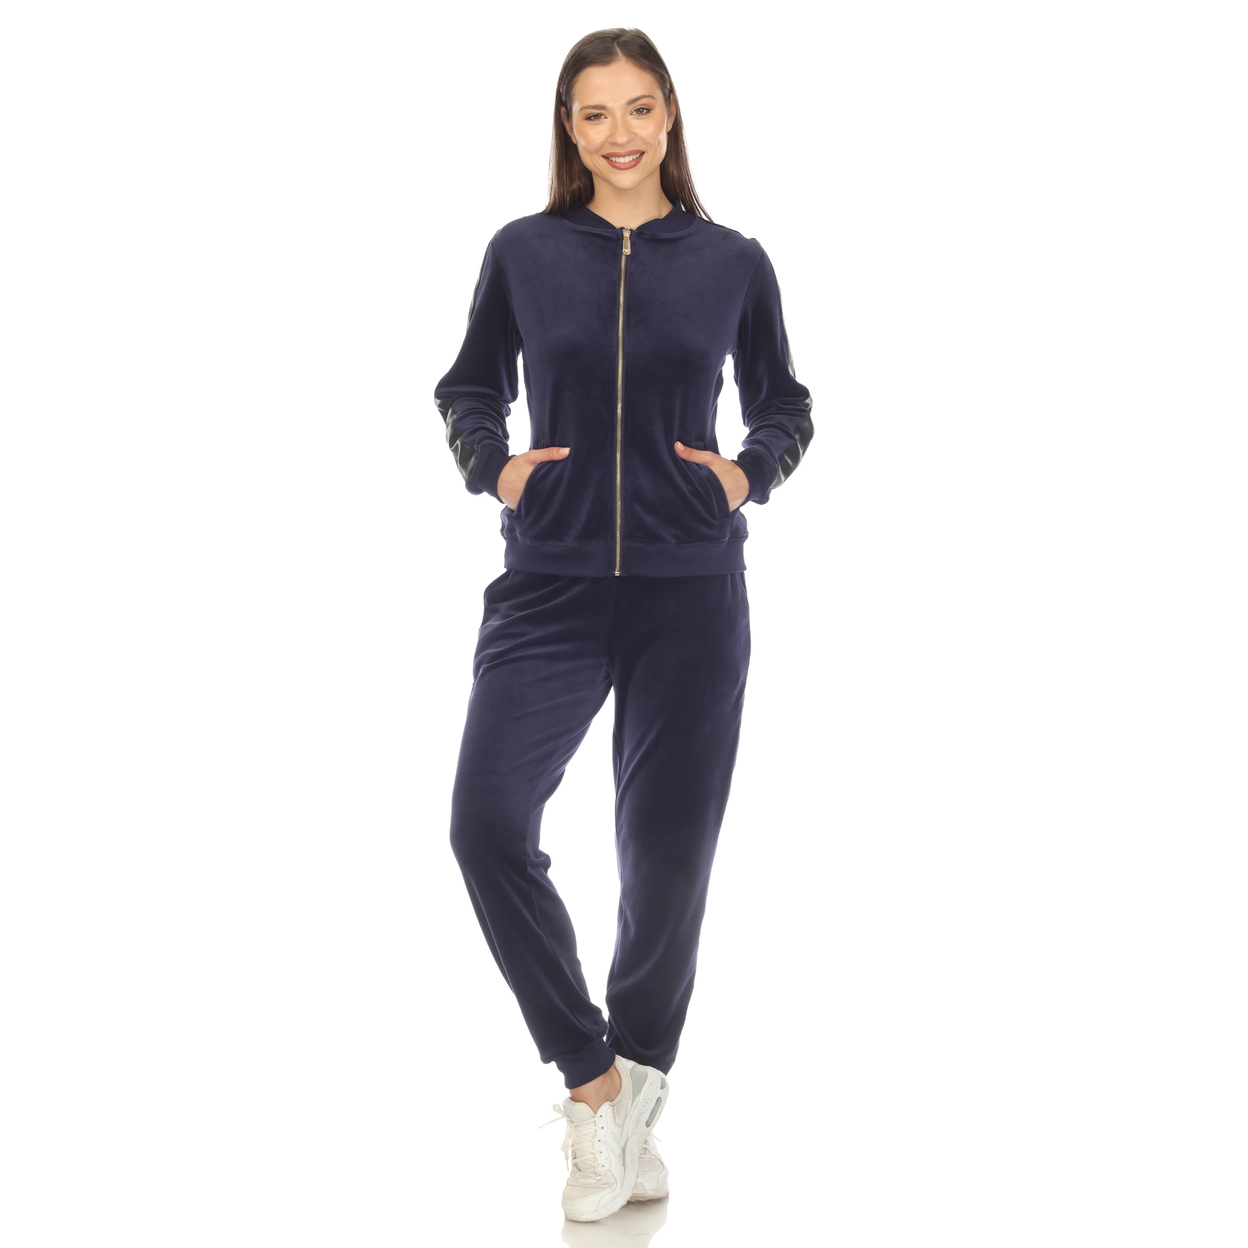 White Mark Women's 2-Piece Velour Tracksuit Set With Faux Leather Stripe - Navy, 1x